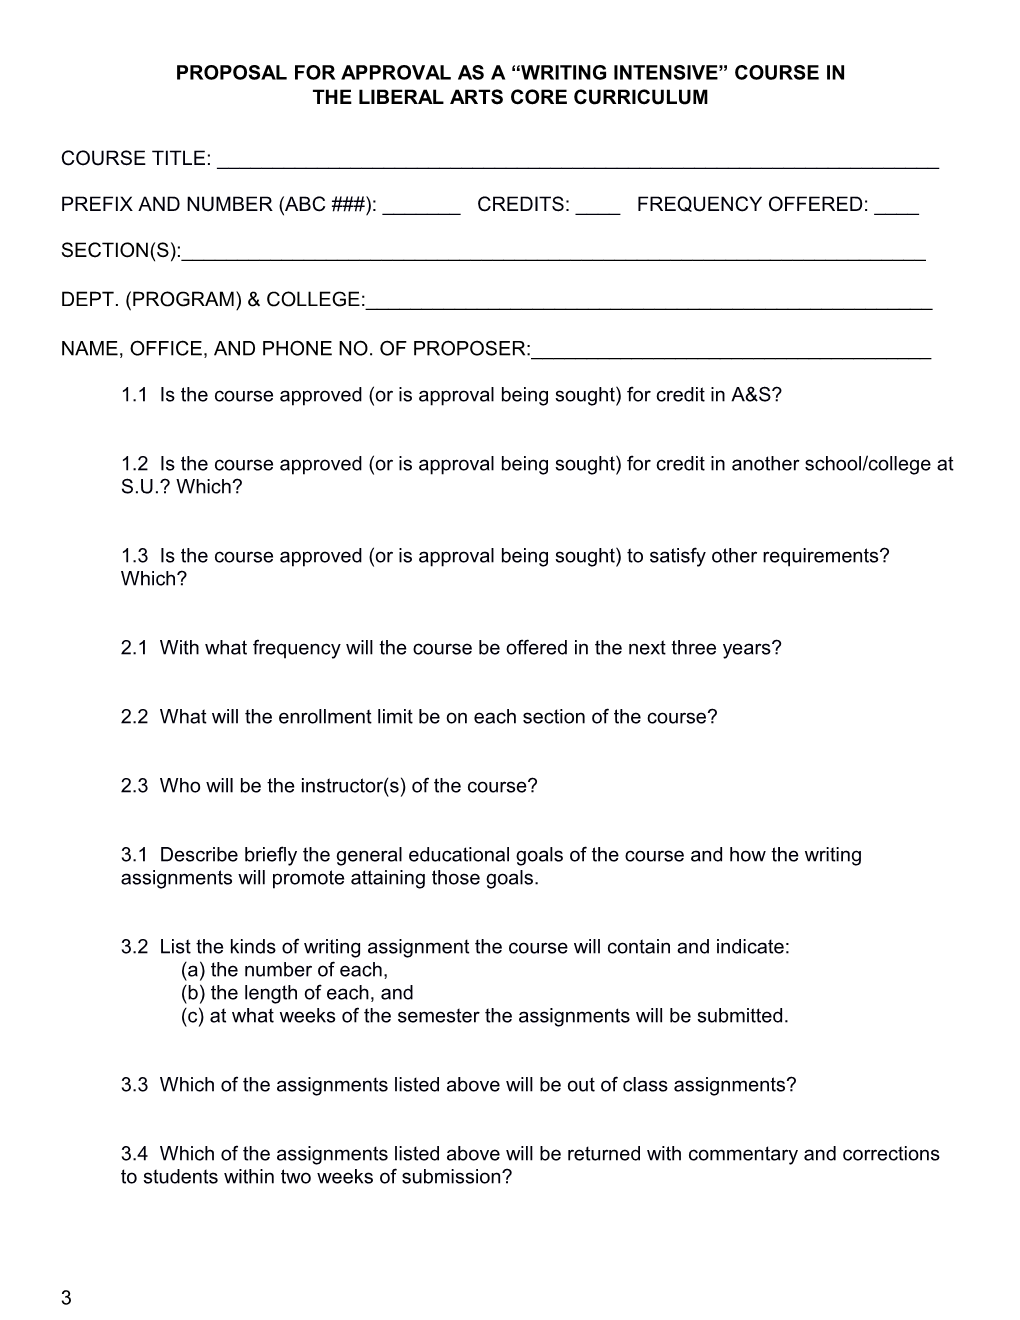 Guidelines and Proposal Form